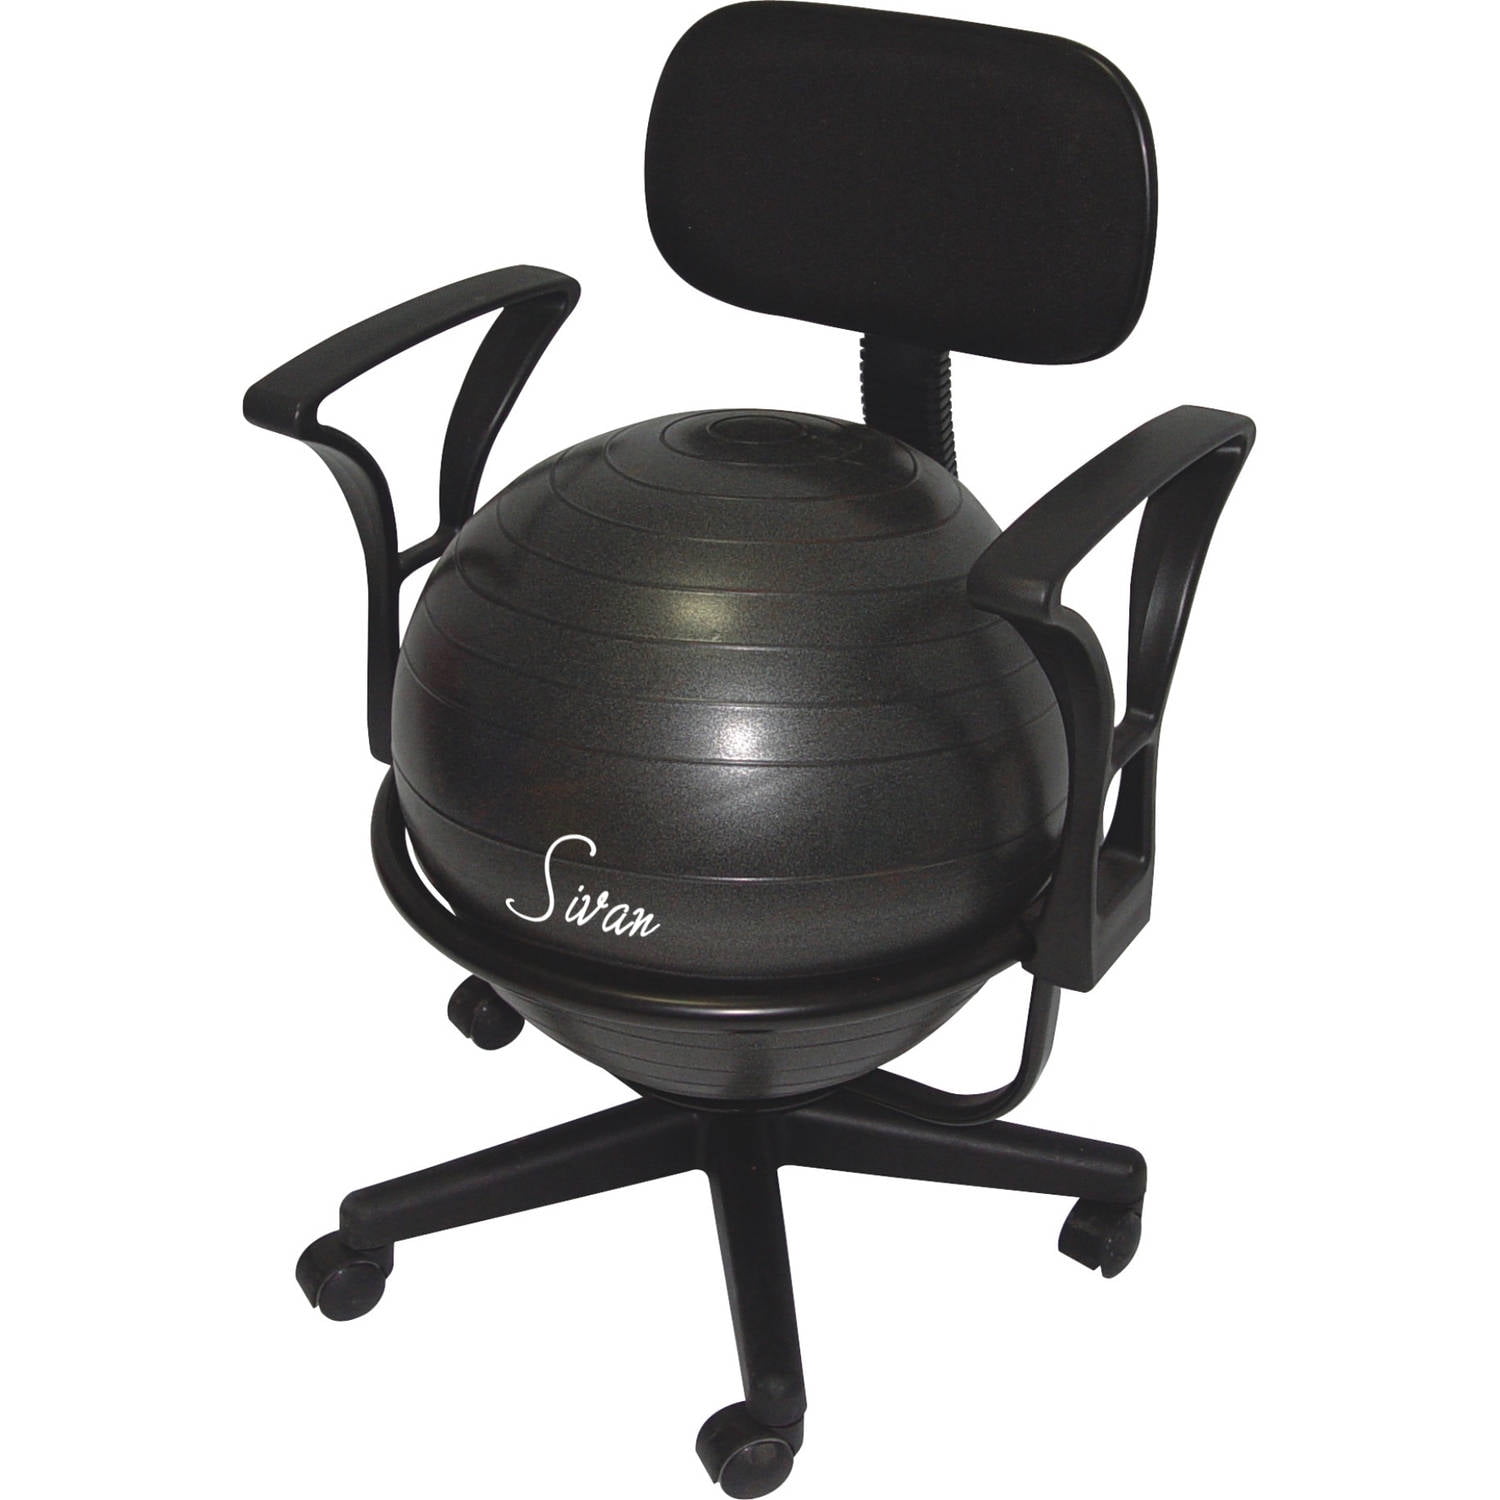 Black Large Sivan Health and Fitness Balance Ball Adjustable Fit Chair with Pump